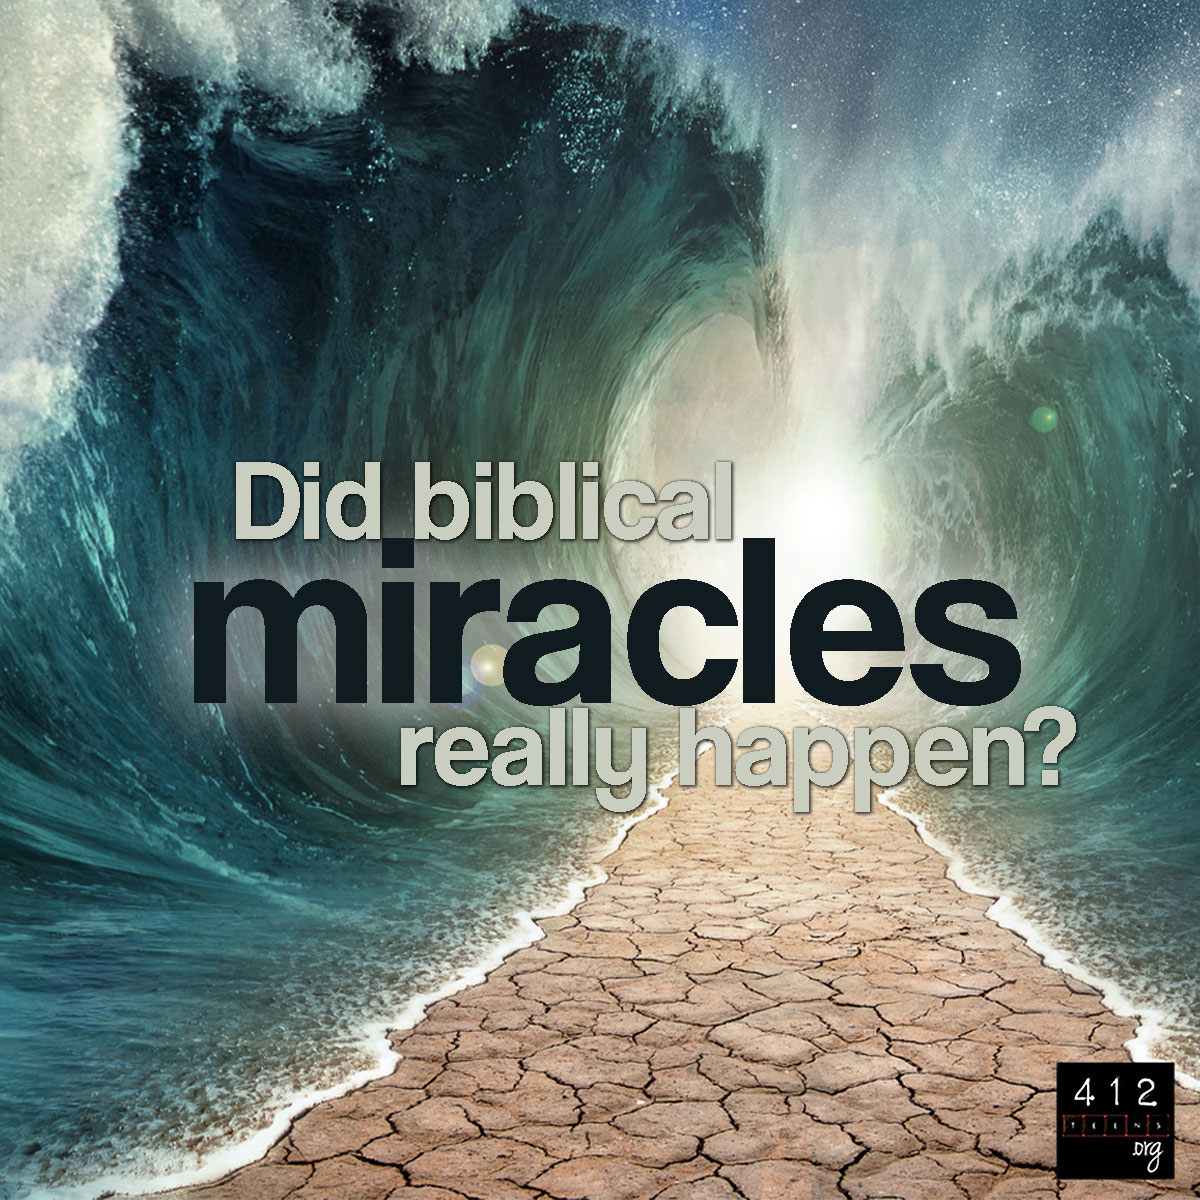 made of miracles